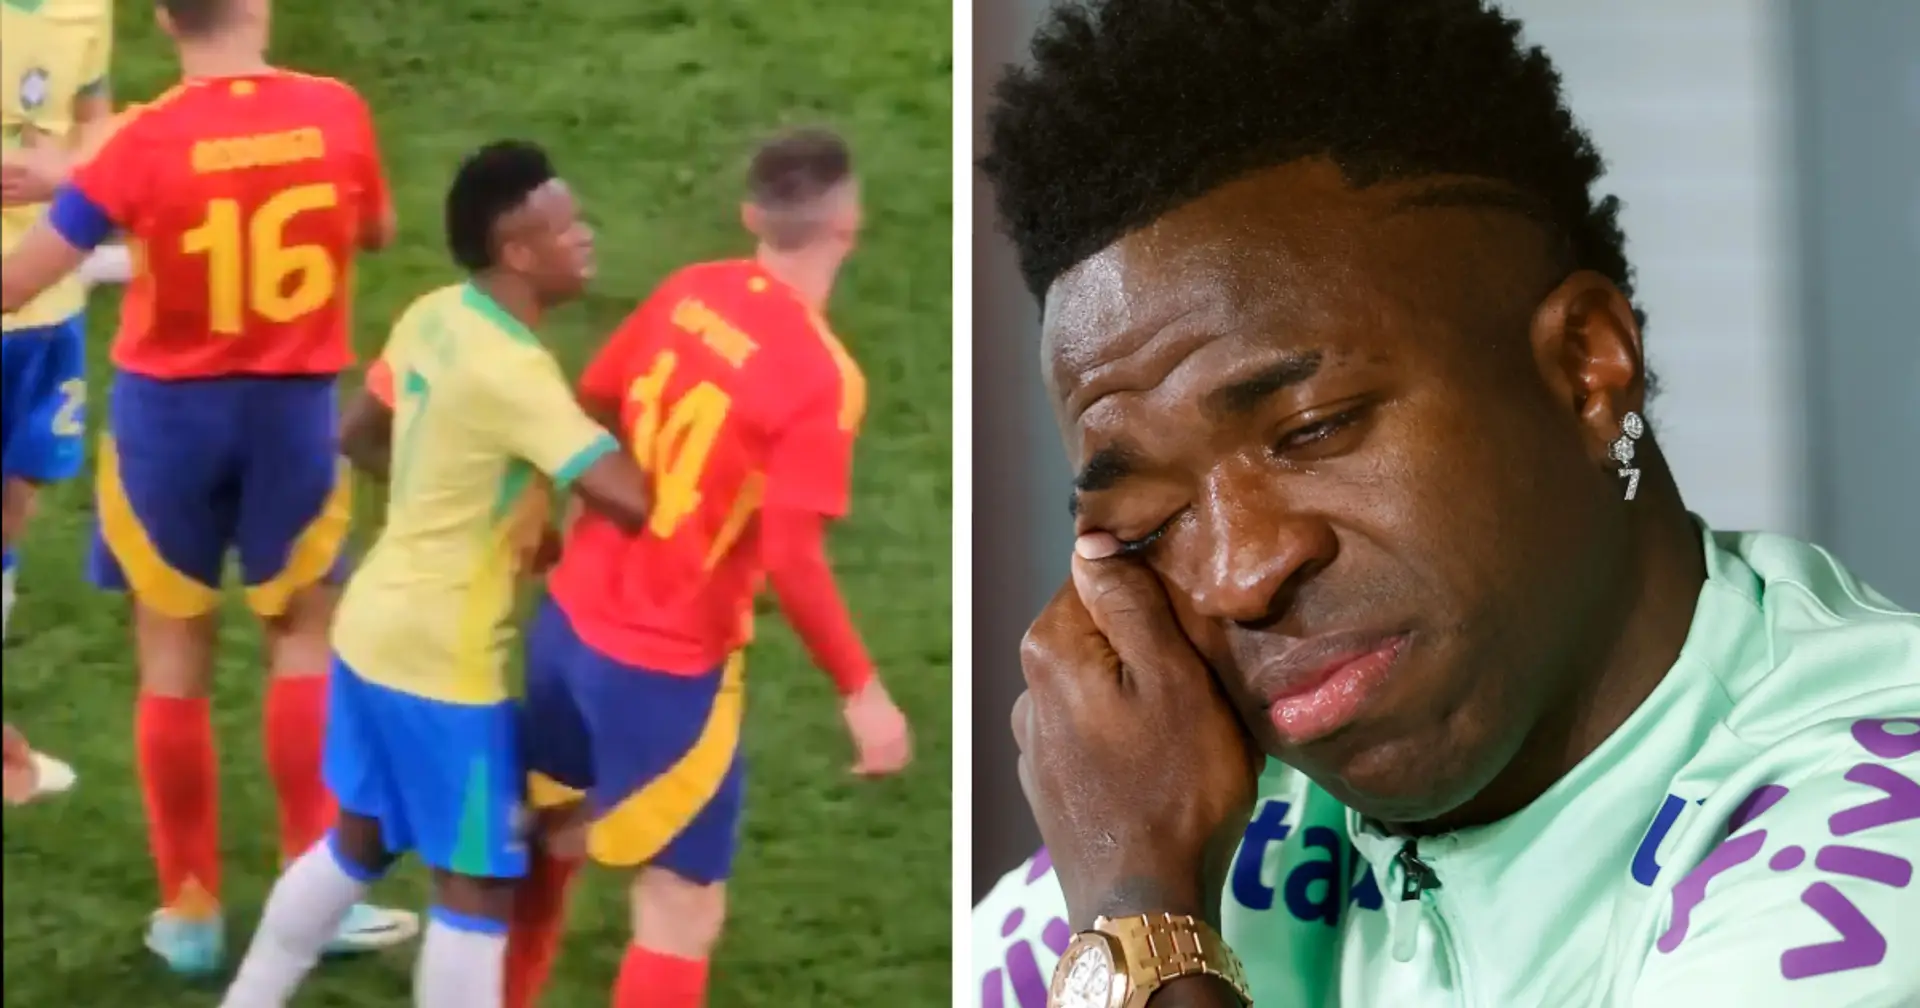 Spanish player taunts Vinicius on social media after unprovoked push